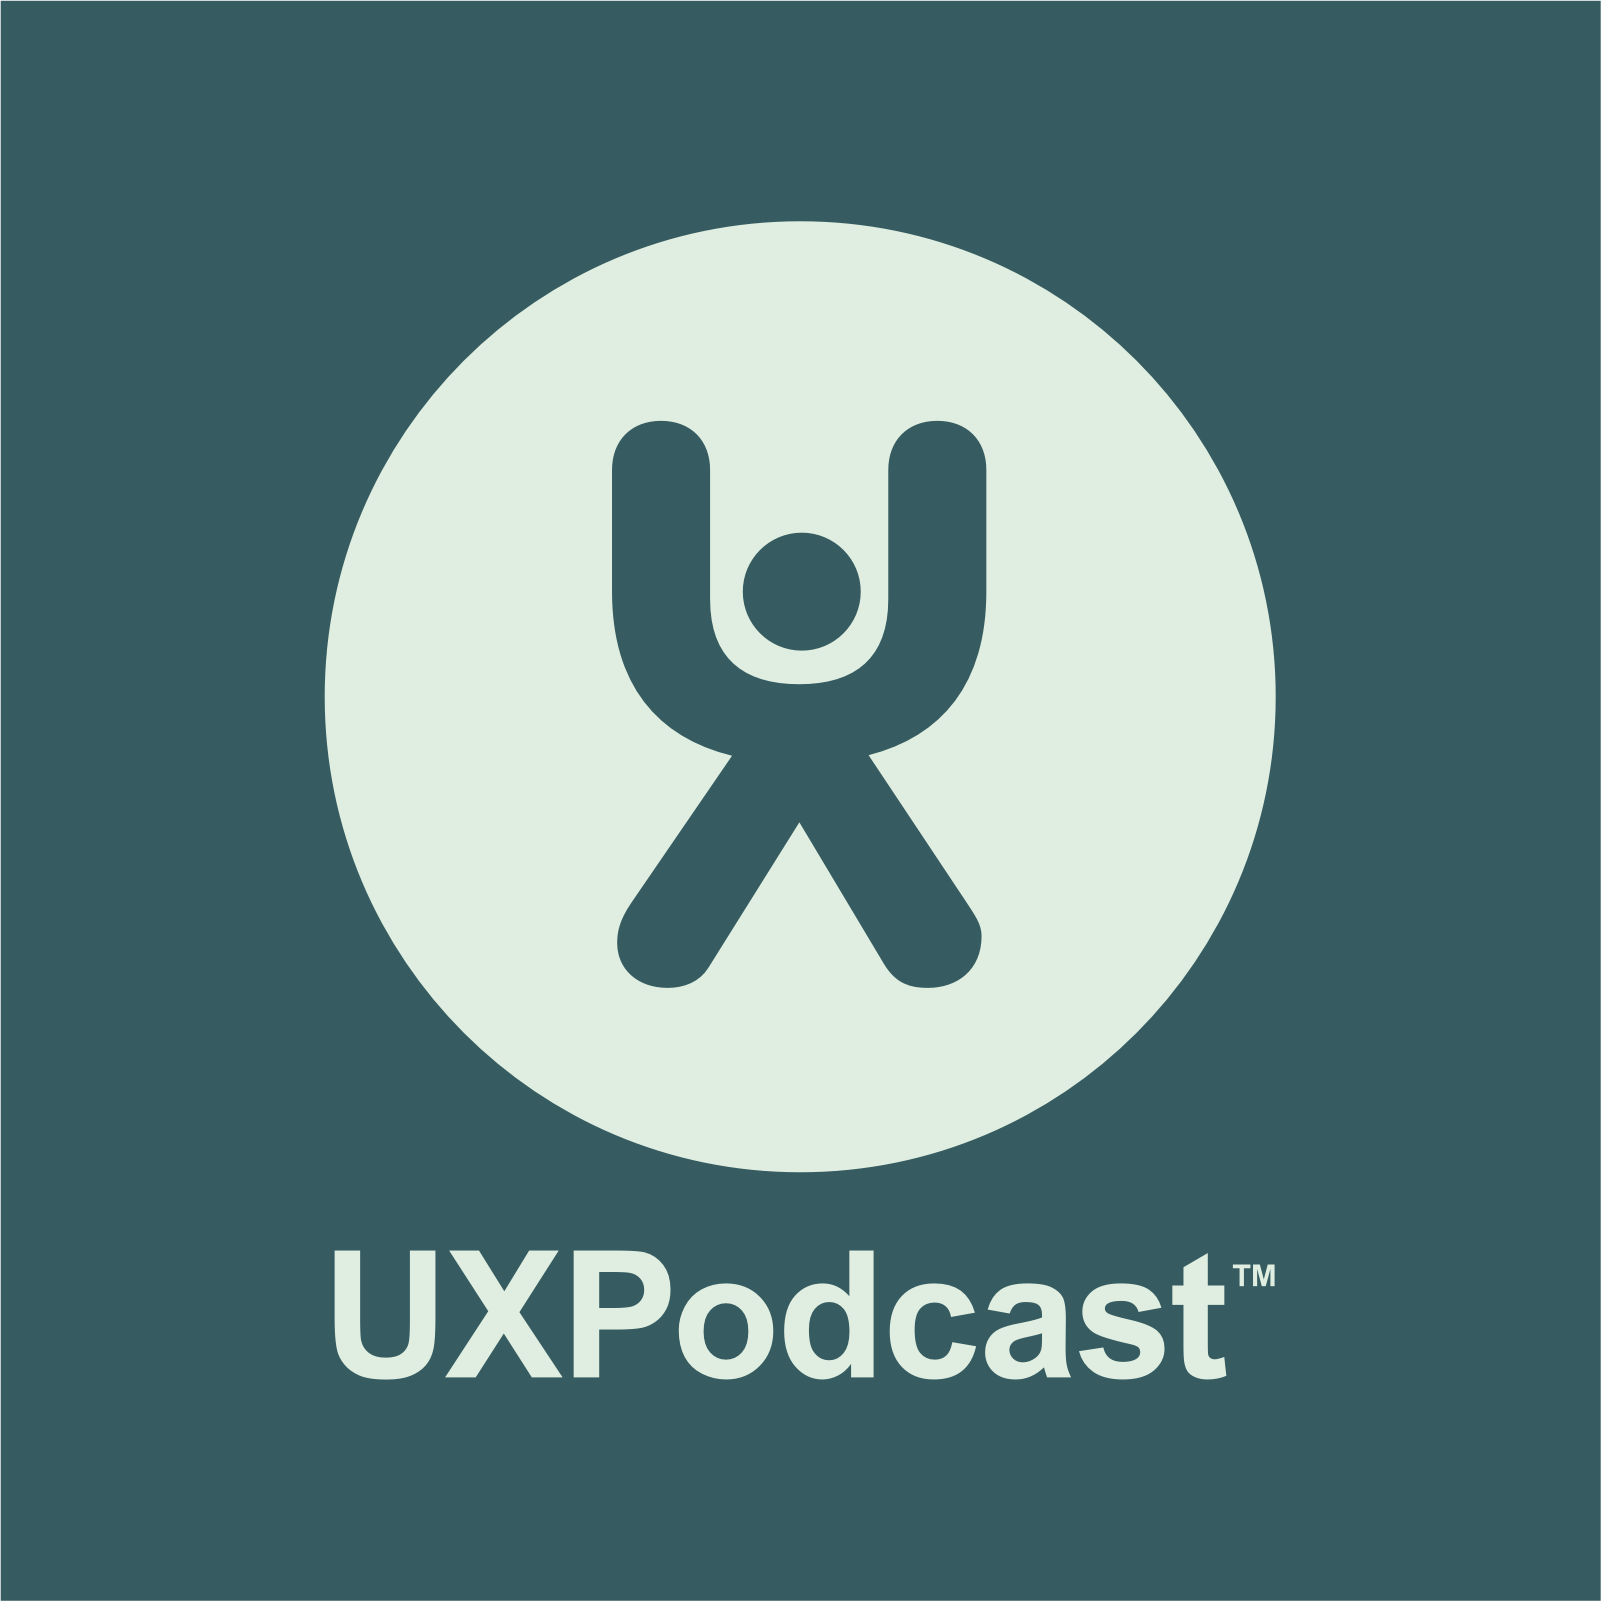 UX Podcast cover art - pictogram person X with top part shaped as a U indicating raised arms, combined with a circle as the head.